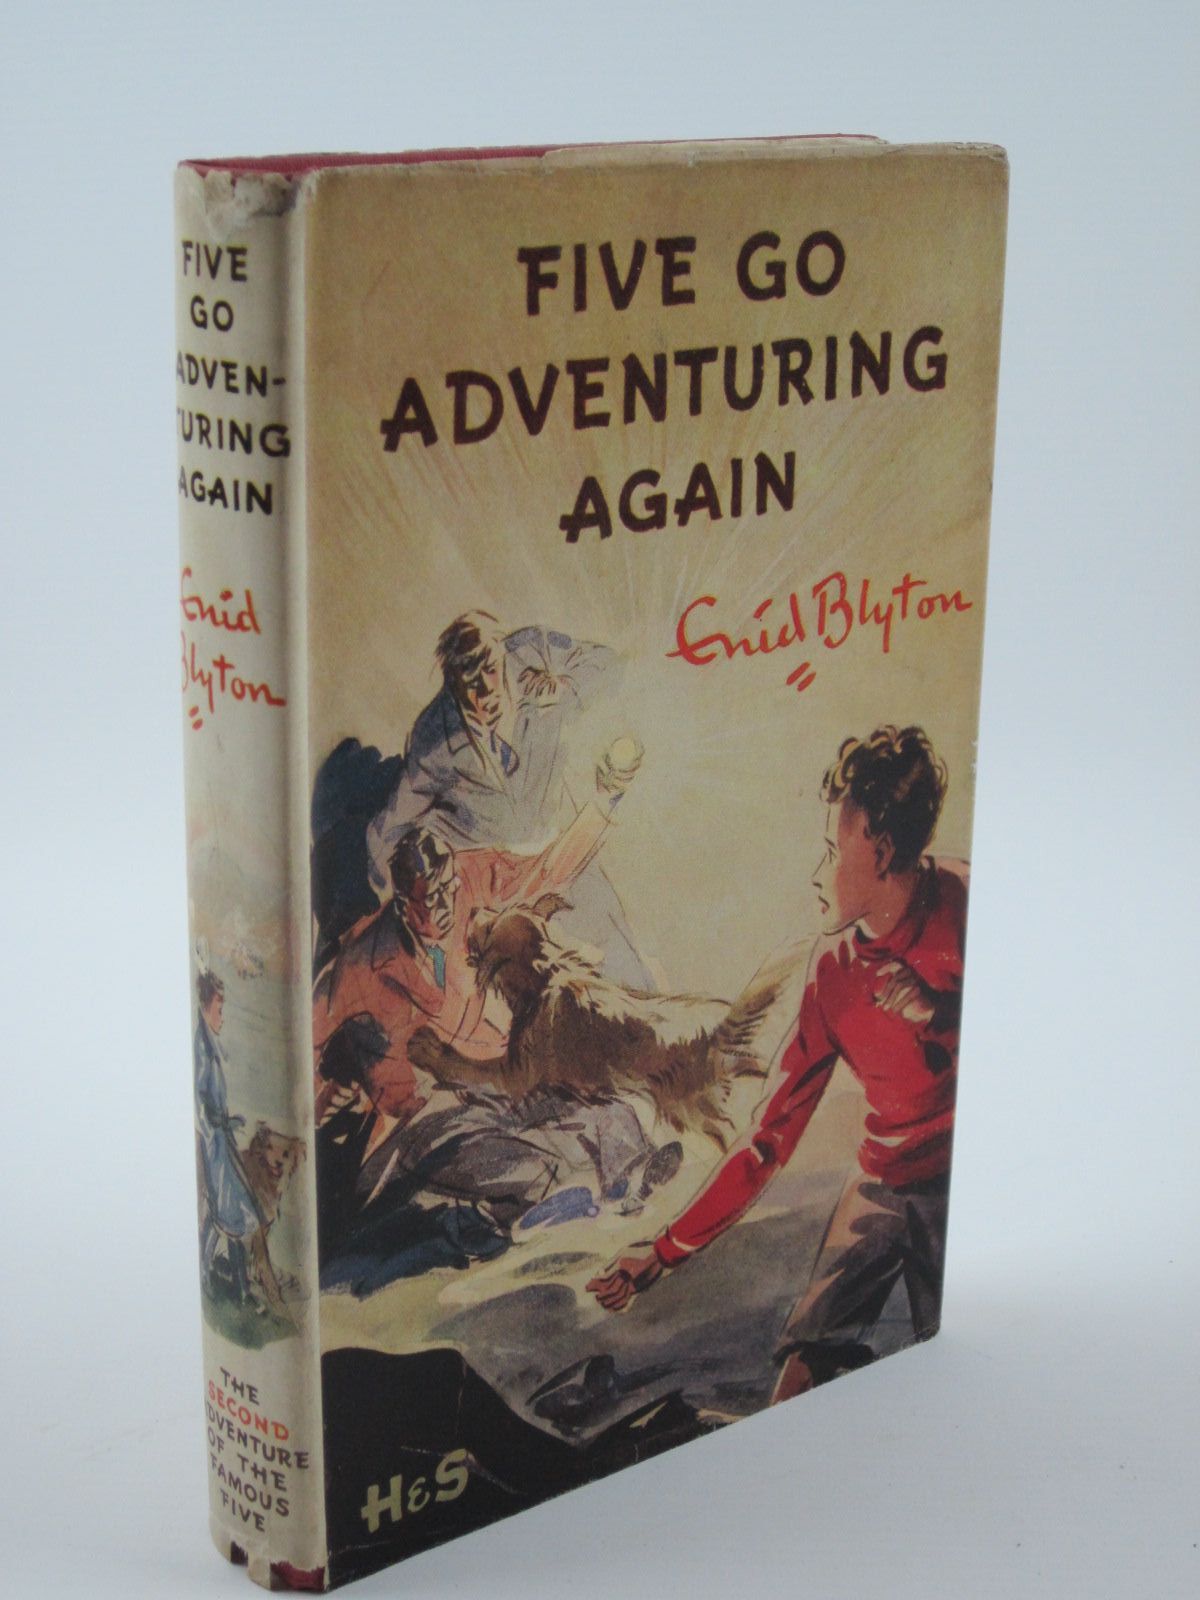 Cover of FIVE GO ADVENTURING AGAIN by Enid Blyton